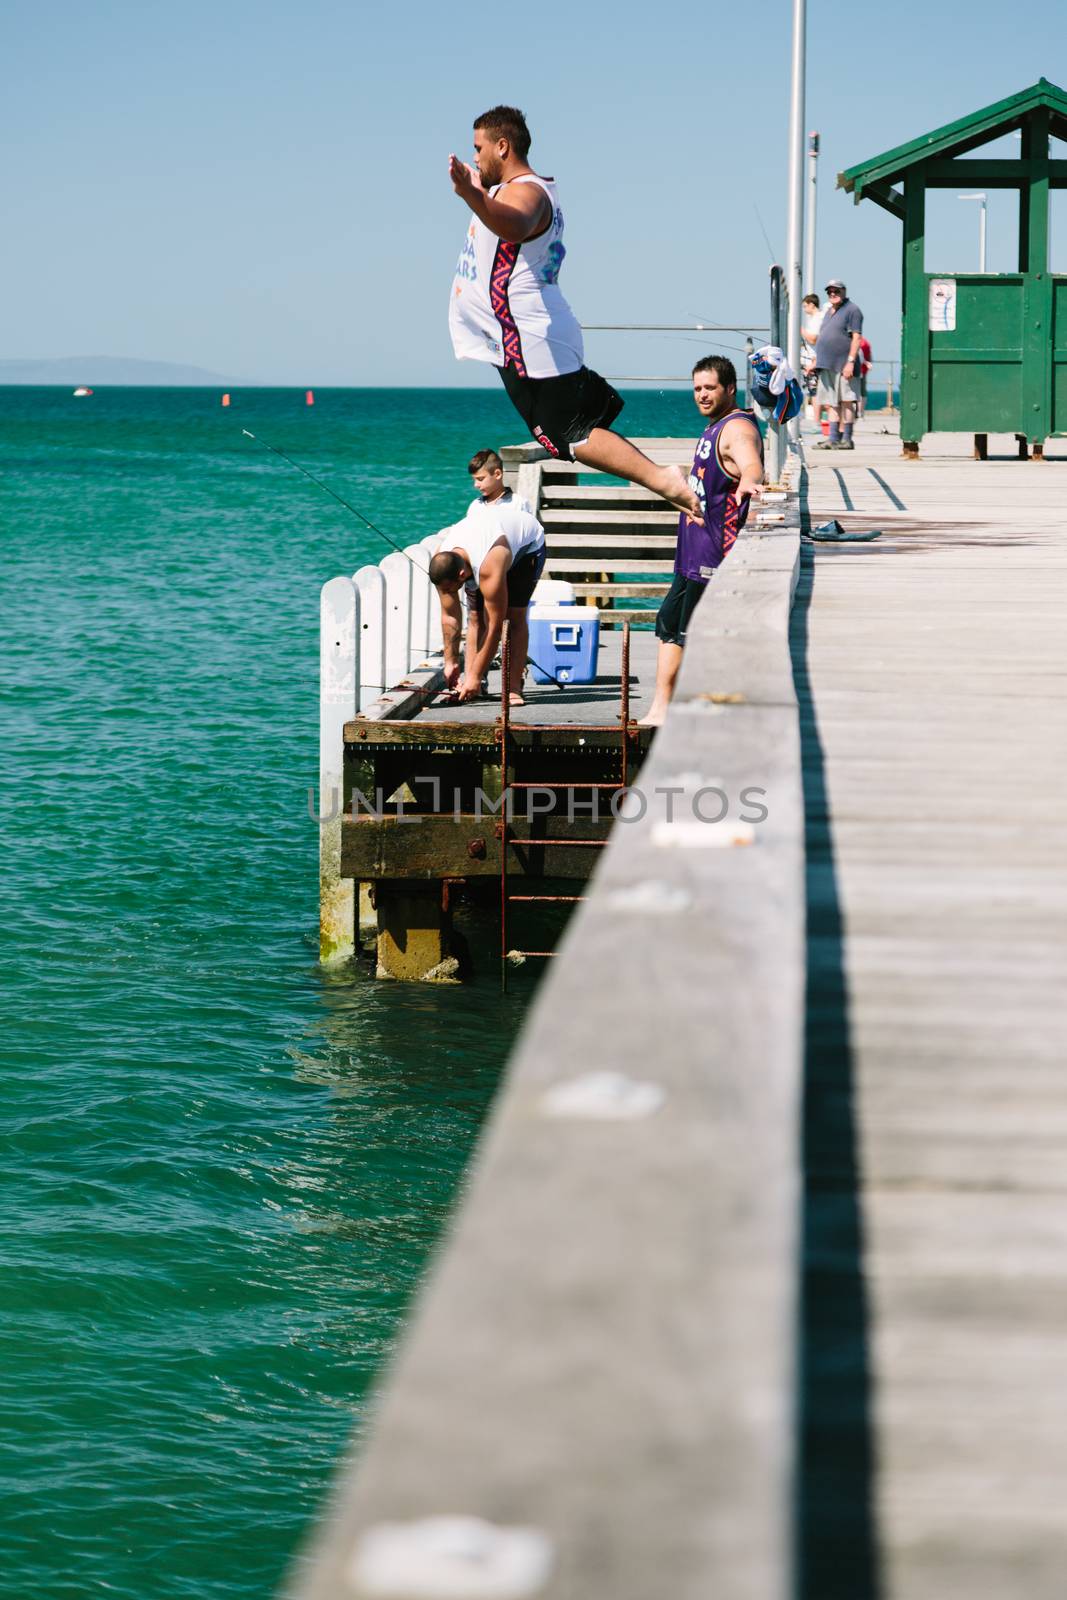 Young men jumping off jetty into water by davidhewison